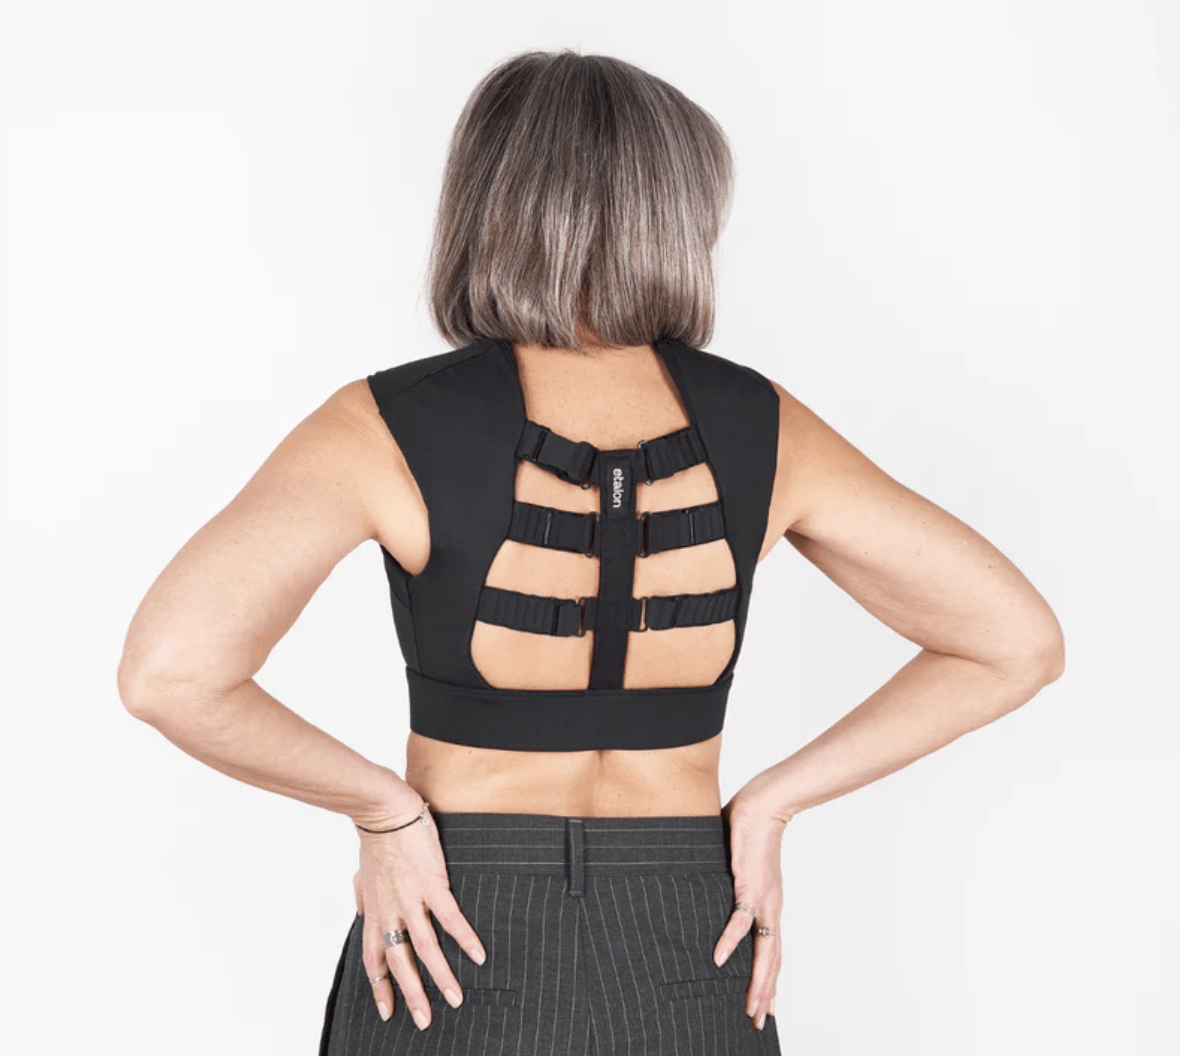 A Posture-Correcting Sports Bra—and More Clever Items to Simplify